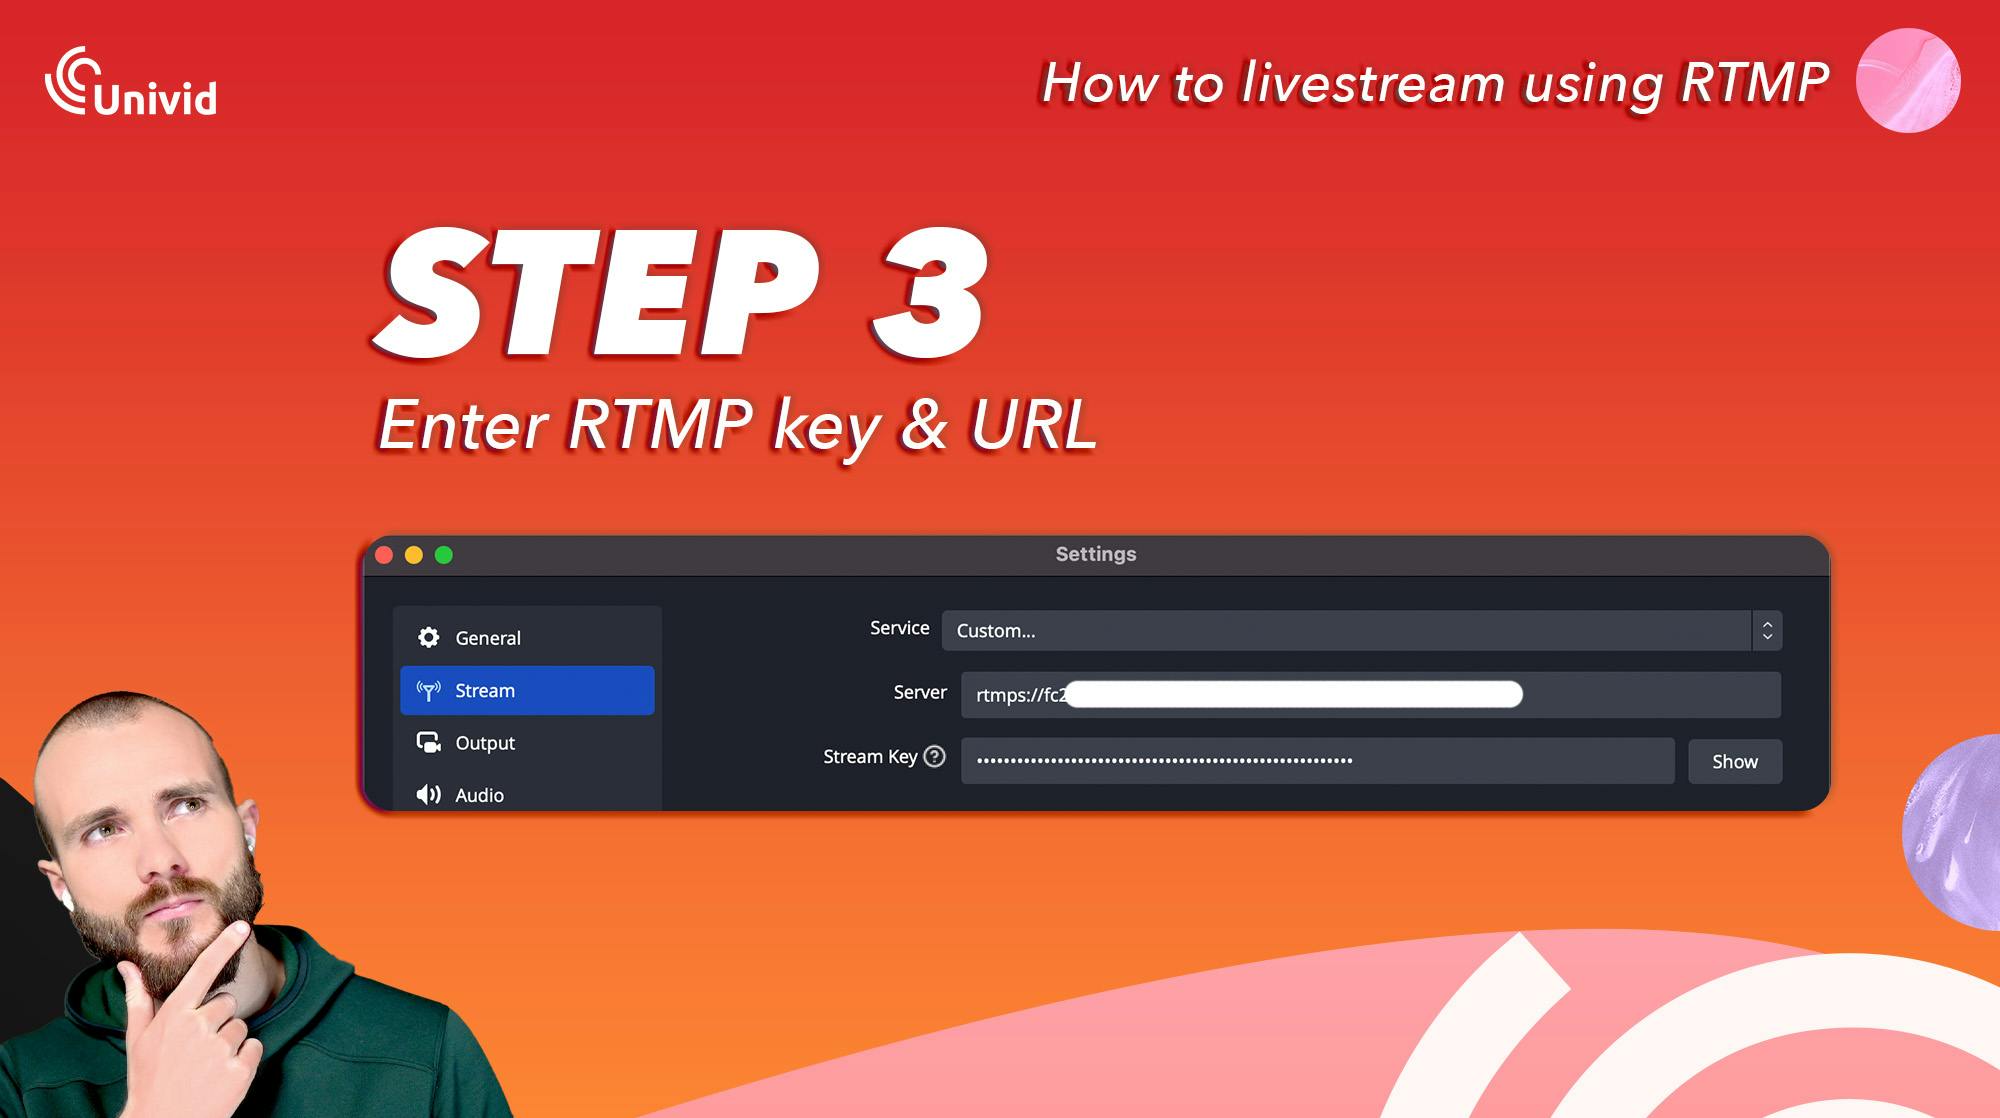 RTMP How to livestream guide - Step 3